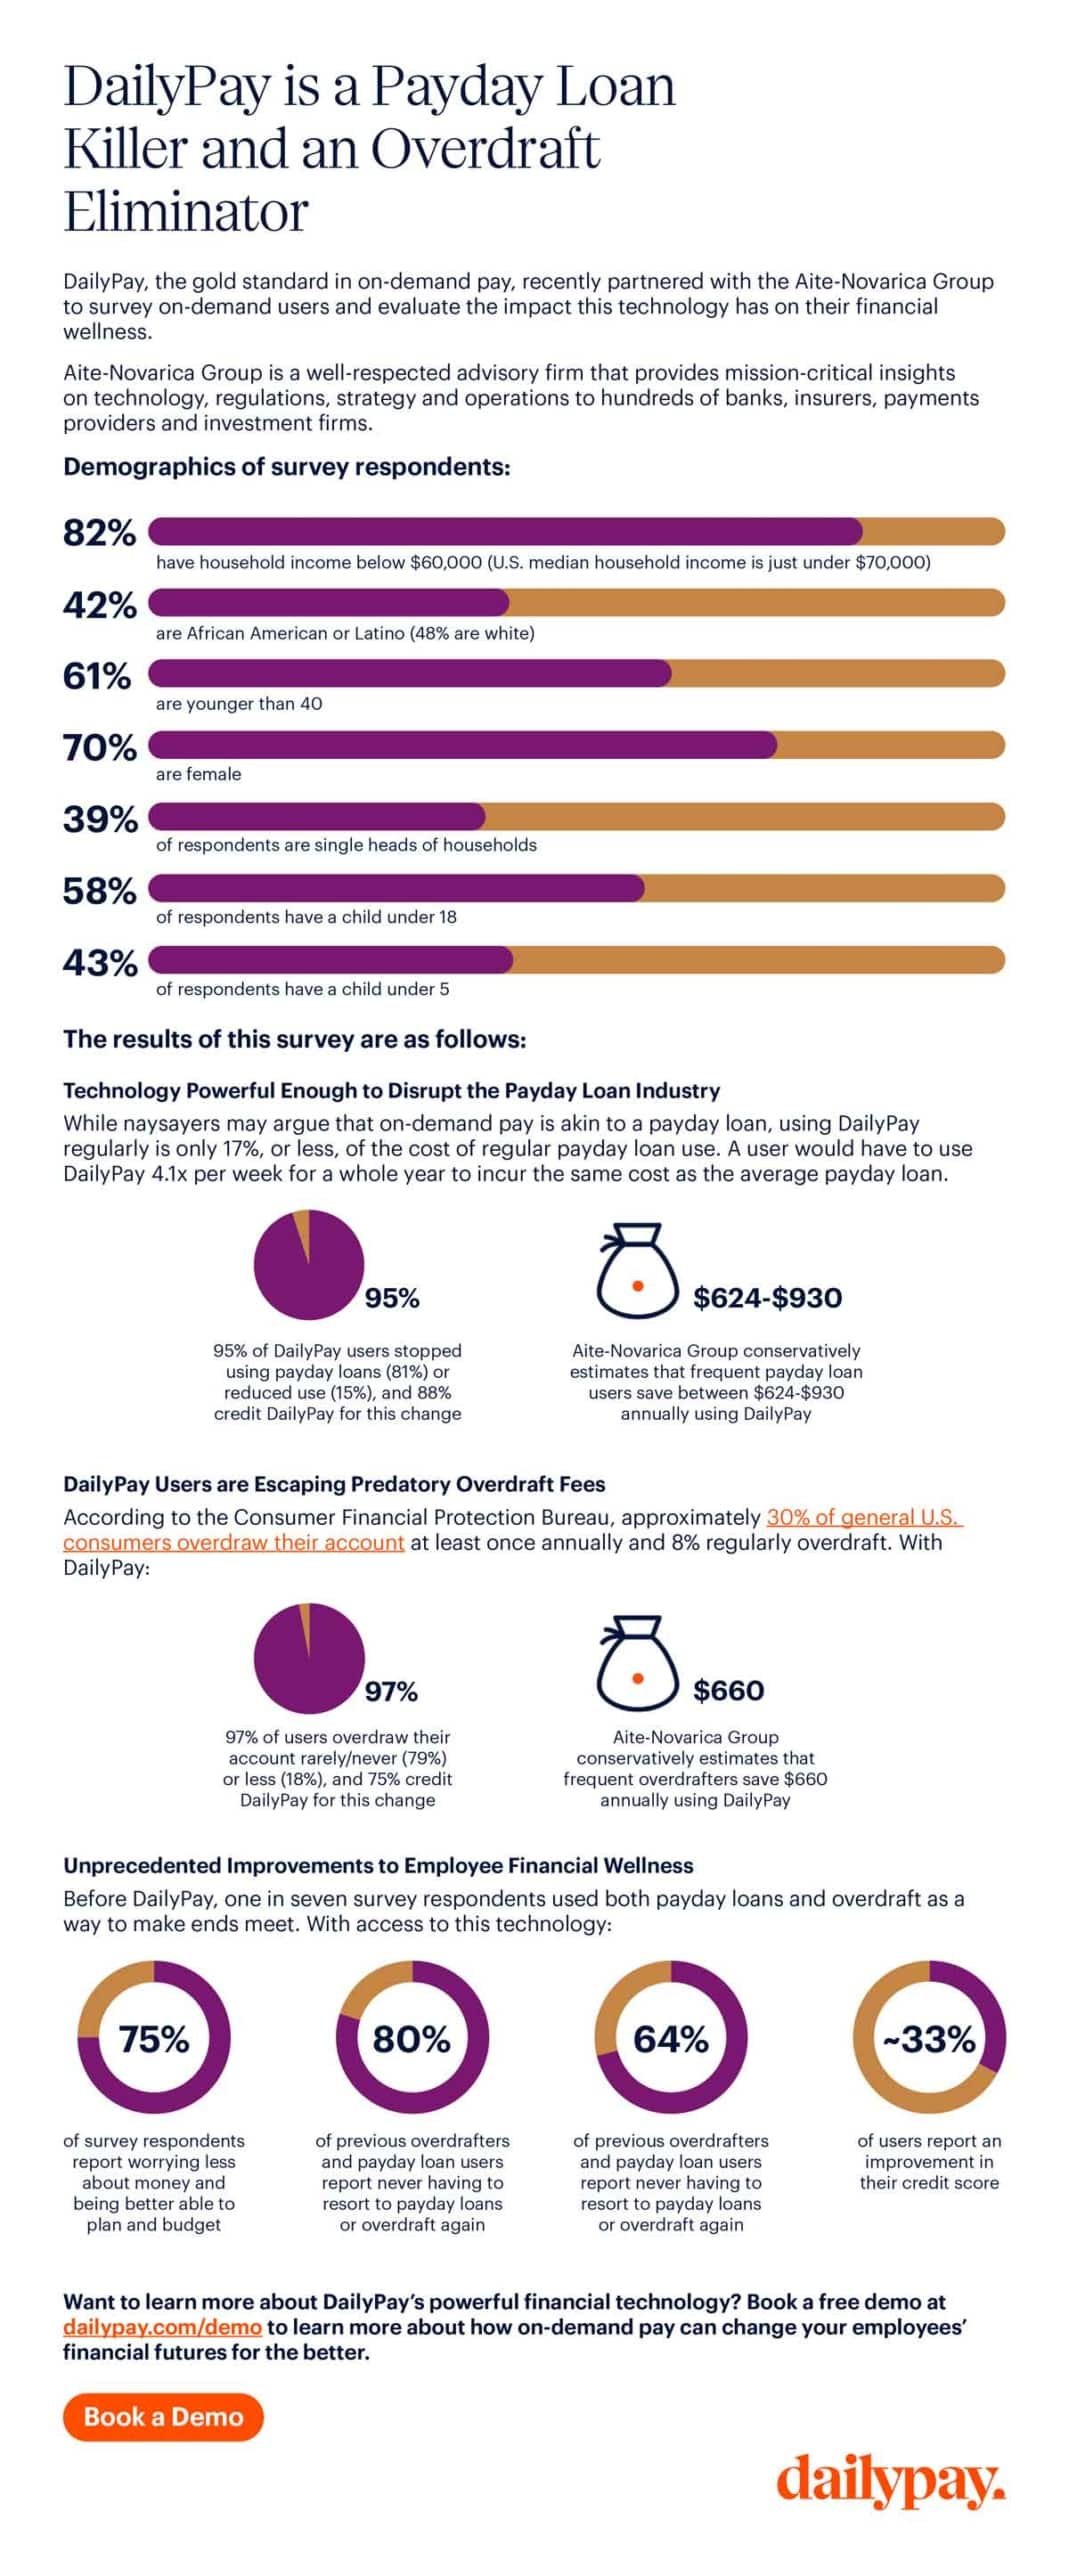 Infographic titled "DailyPay is a Payday Loan Killer and an Overdraft Eliminator" showcasing survey results from the Aite-Novarica Group. Key statistics include 82% believe overdrafts are unfair, 49% have taken payday loans, and 63% support regulatory tech for financial stress. The graphic highlights solutions for financial wellness, including reduced turnover and increased productivity. Orange, purple,